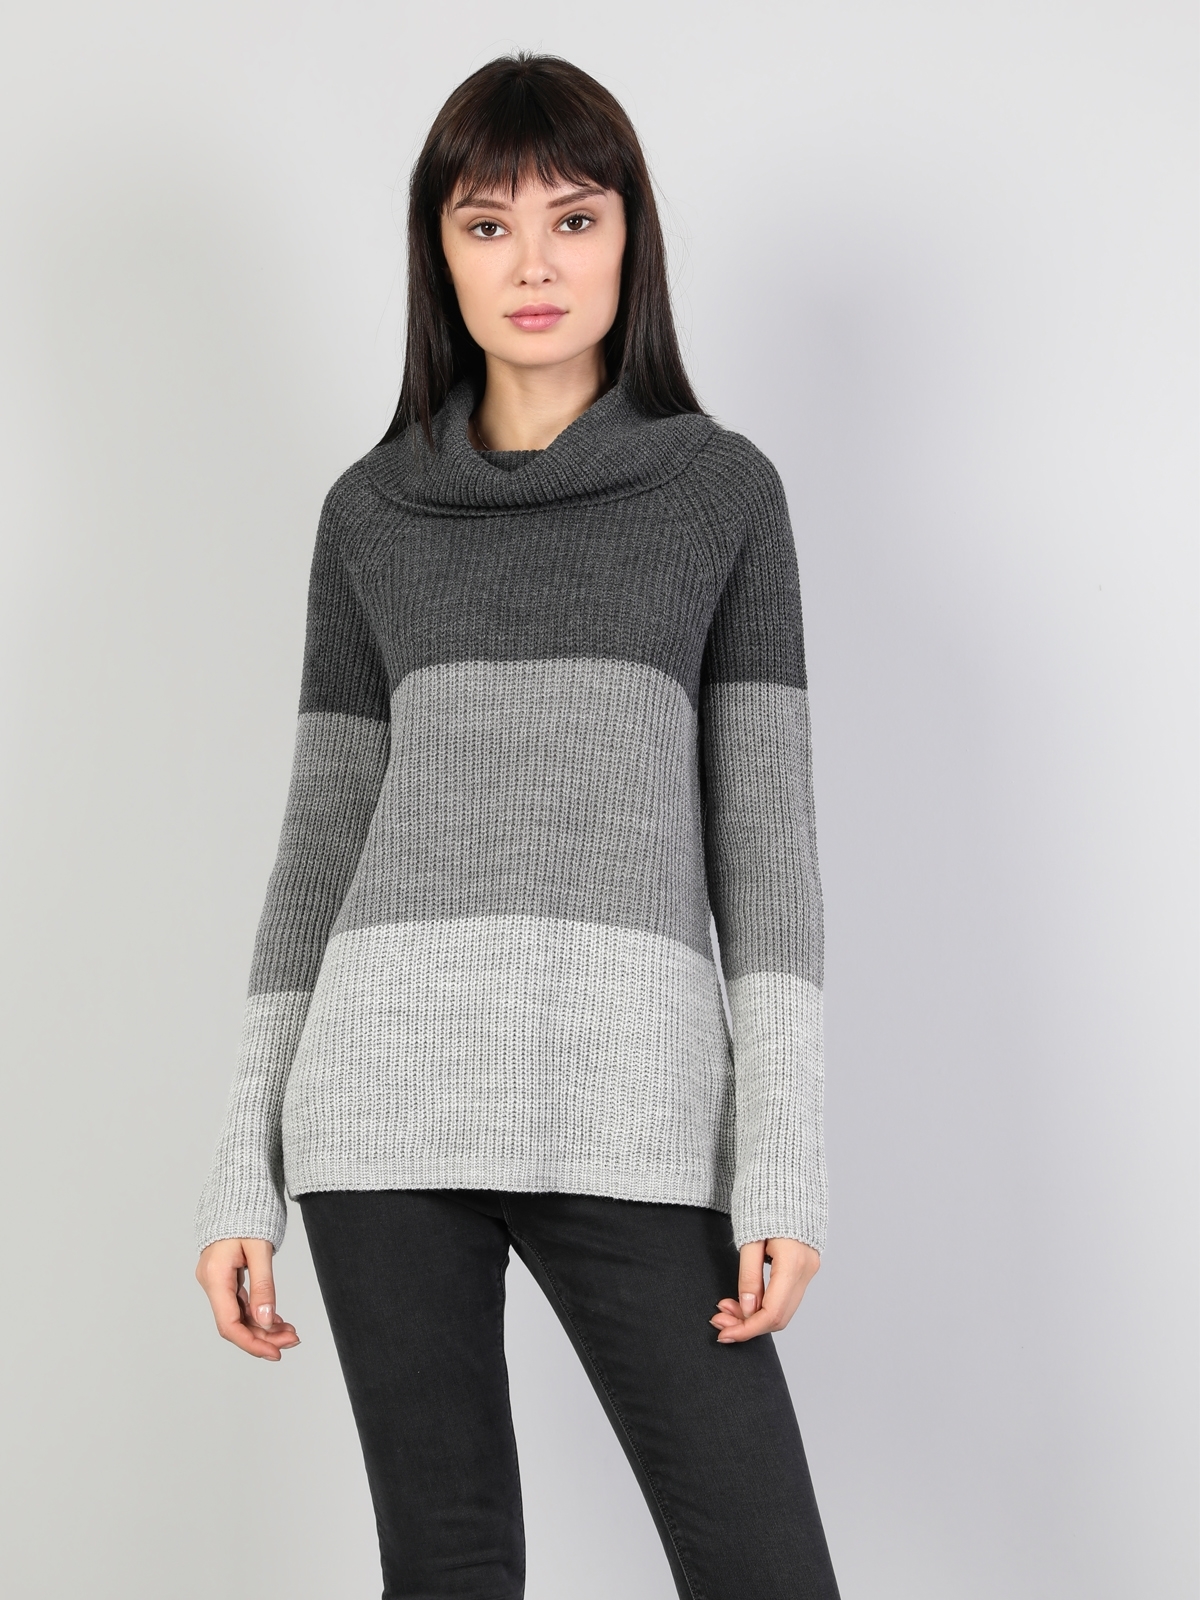 Colins Gray Woman Sweaters. 3